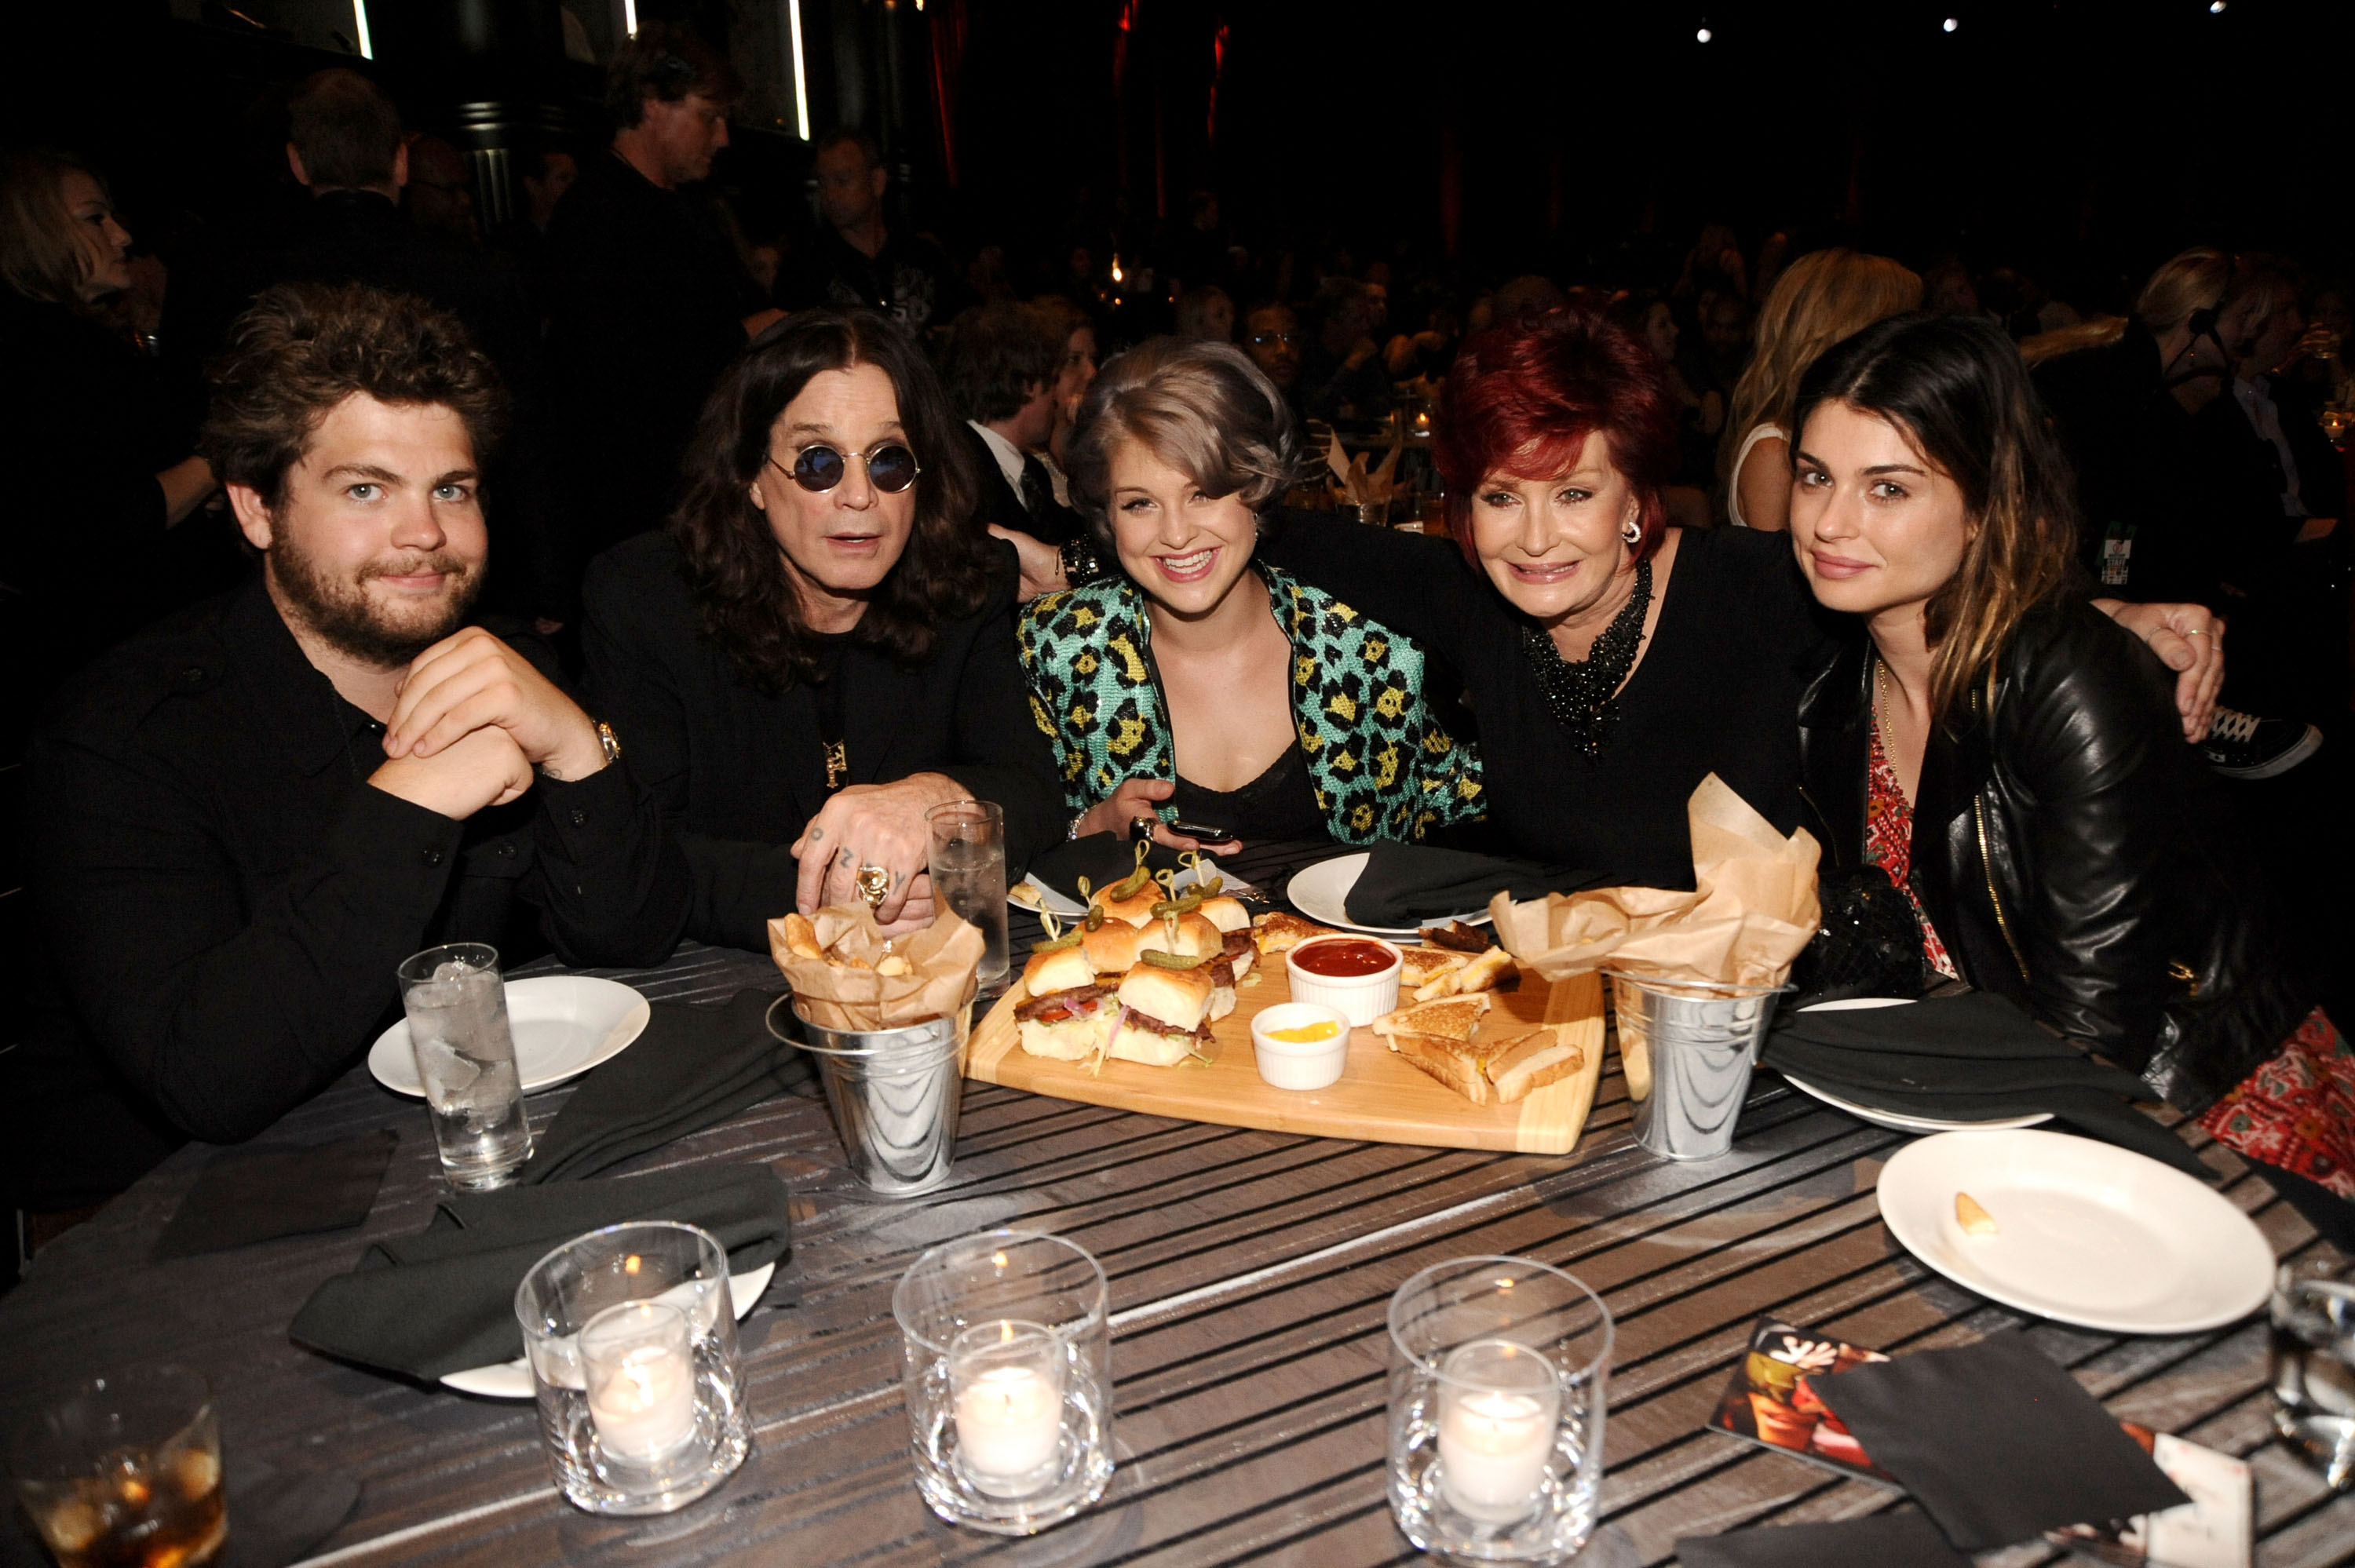 Jack, Ozzy, Kelly, Sharon and Aimee Osbourne at Spike TV's 4th Annual Guys Choice Awards in Los Angeles, California on June 5, 2010 | Source: Getty Images